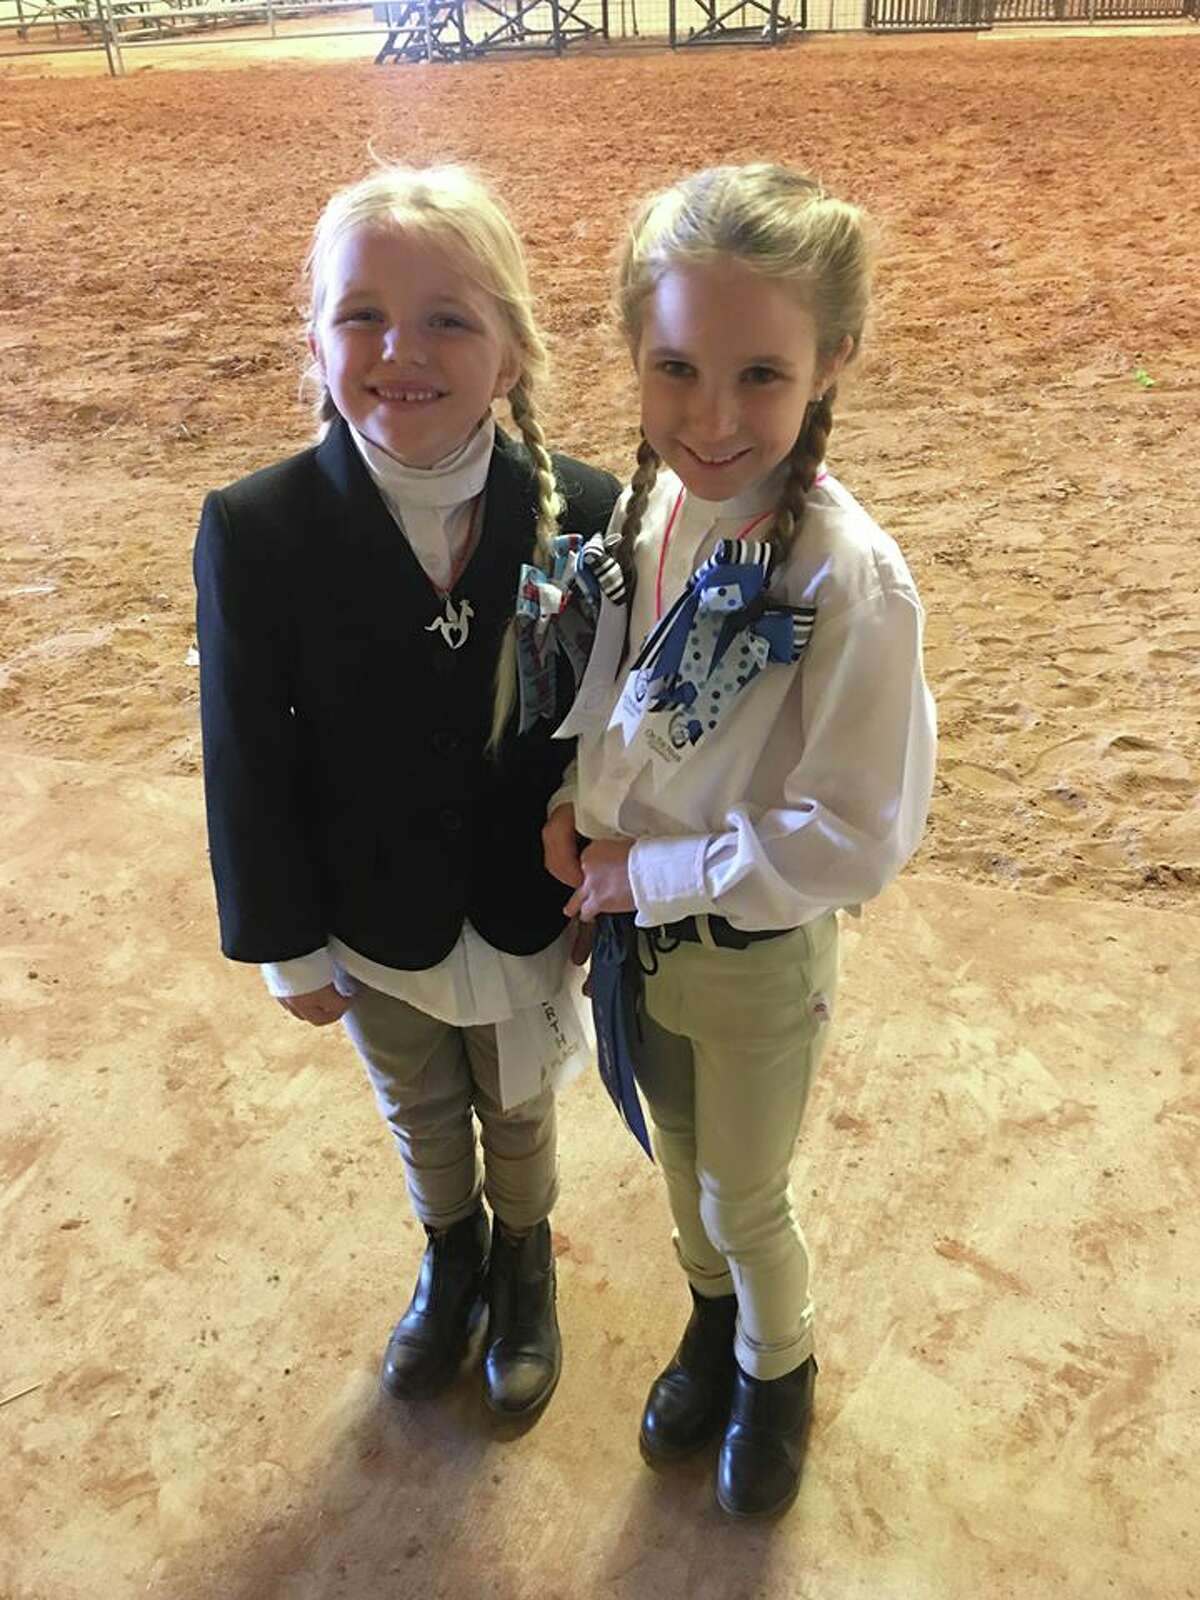 Equestrian show: Blaire Hargesheimer, left and Chloe Vines